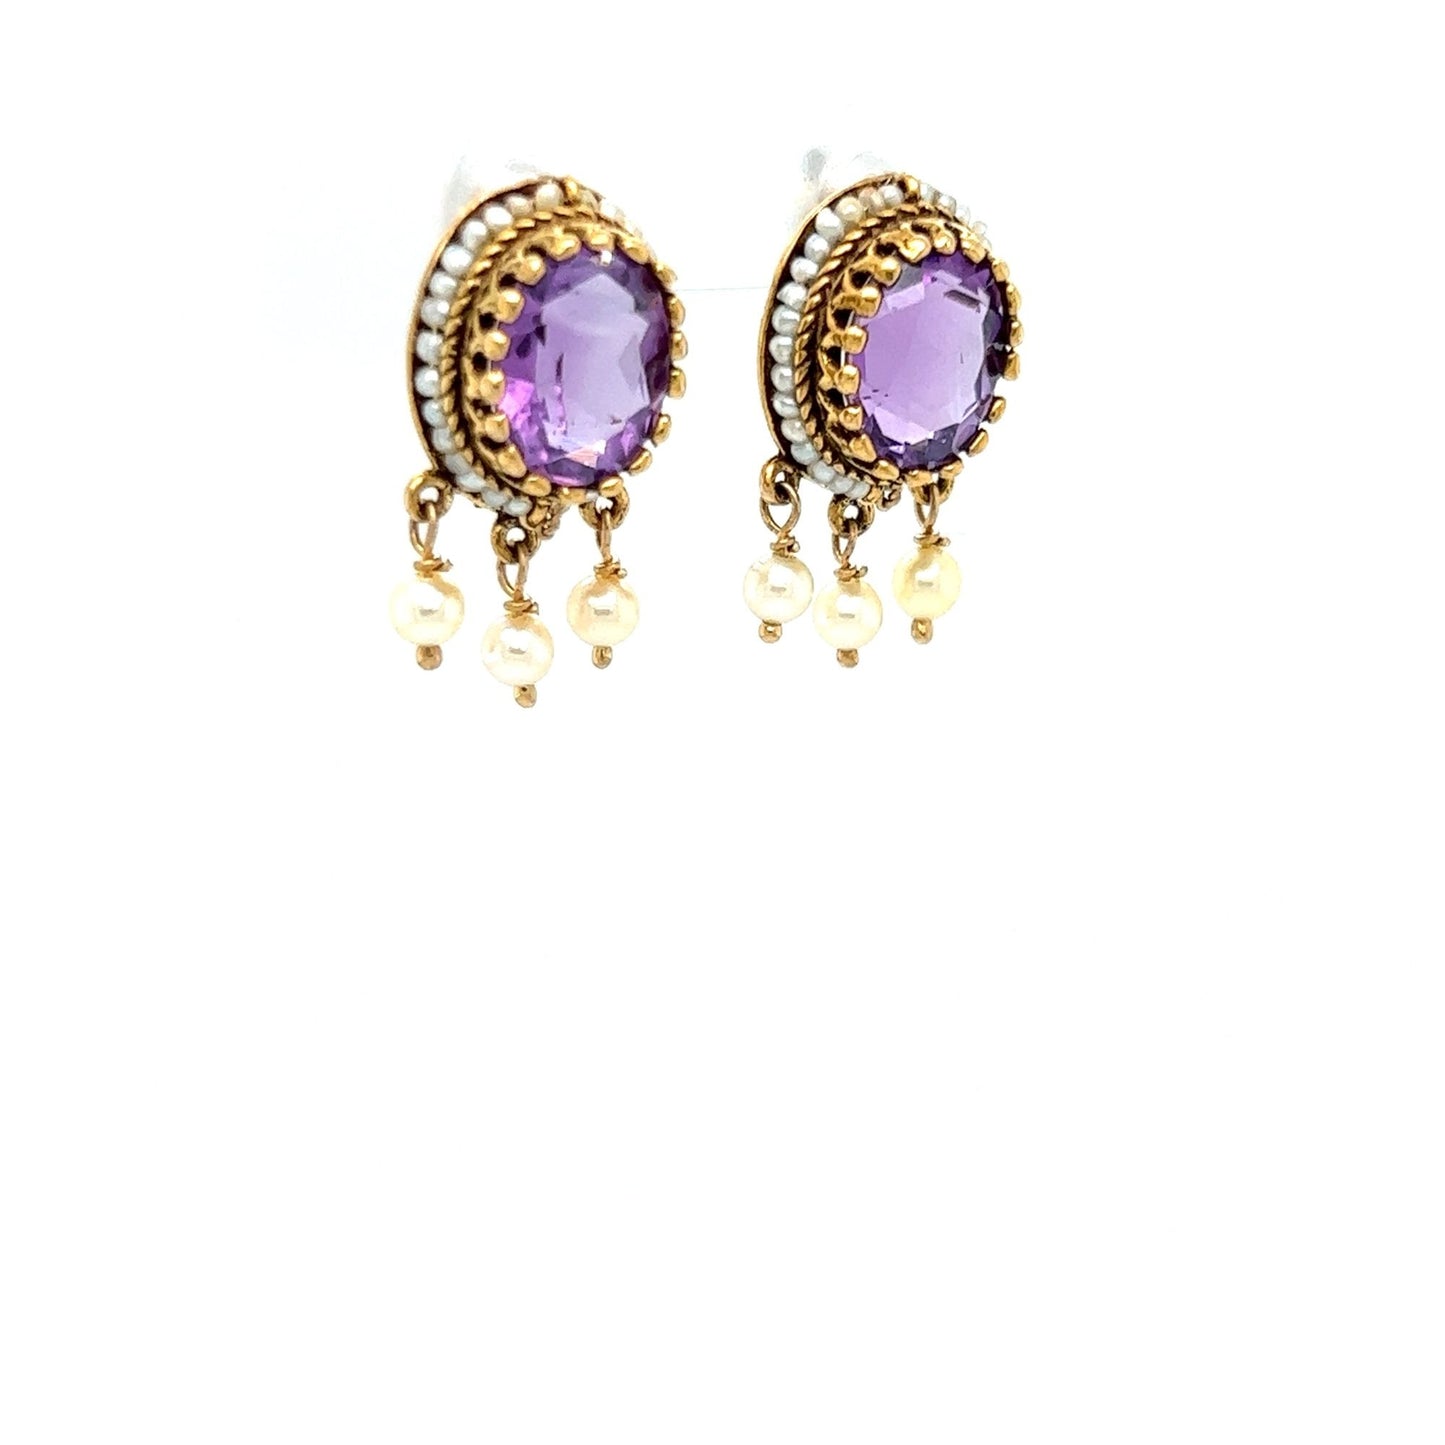 Vintage 14kt Yellow Gold Amethyst and Pearl Earrings w/ Seeded Pearl and Filagree Accent